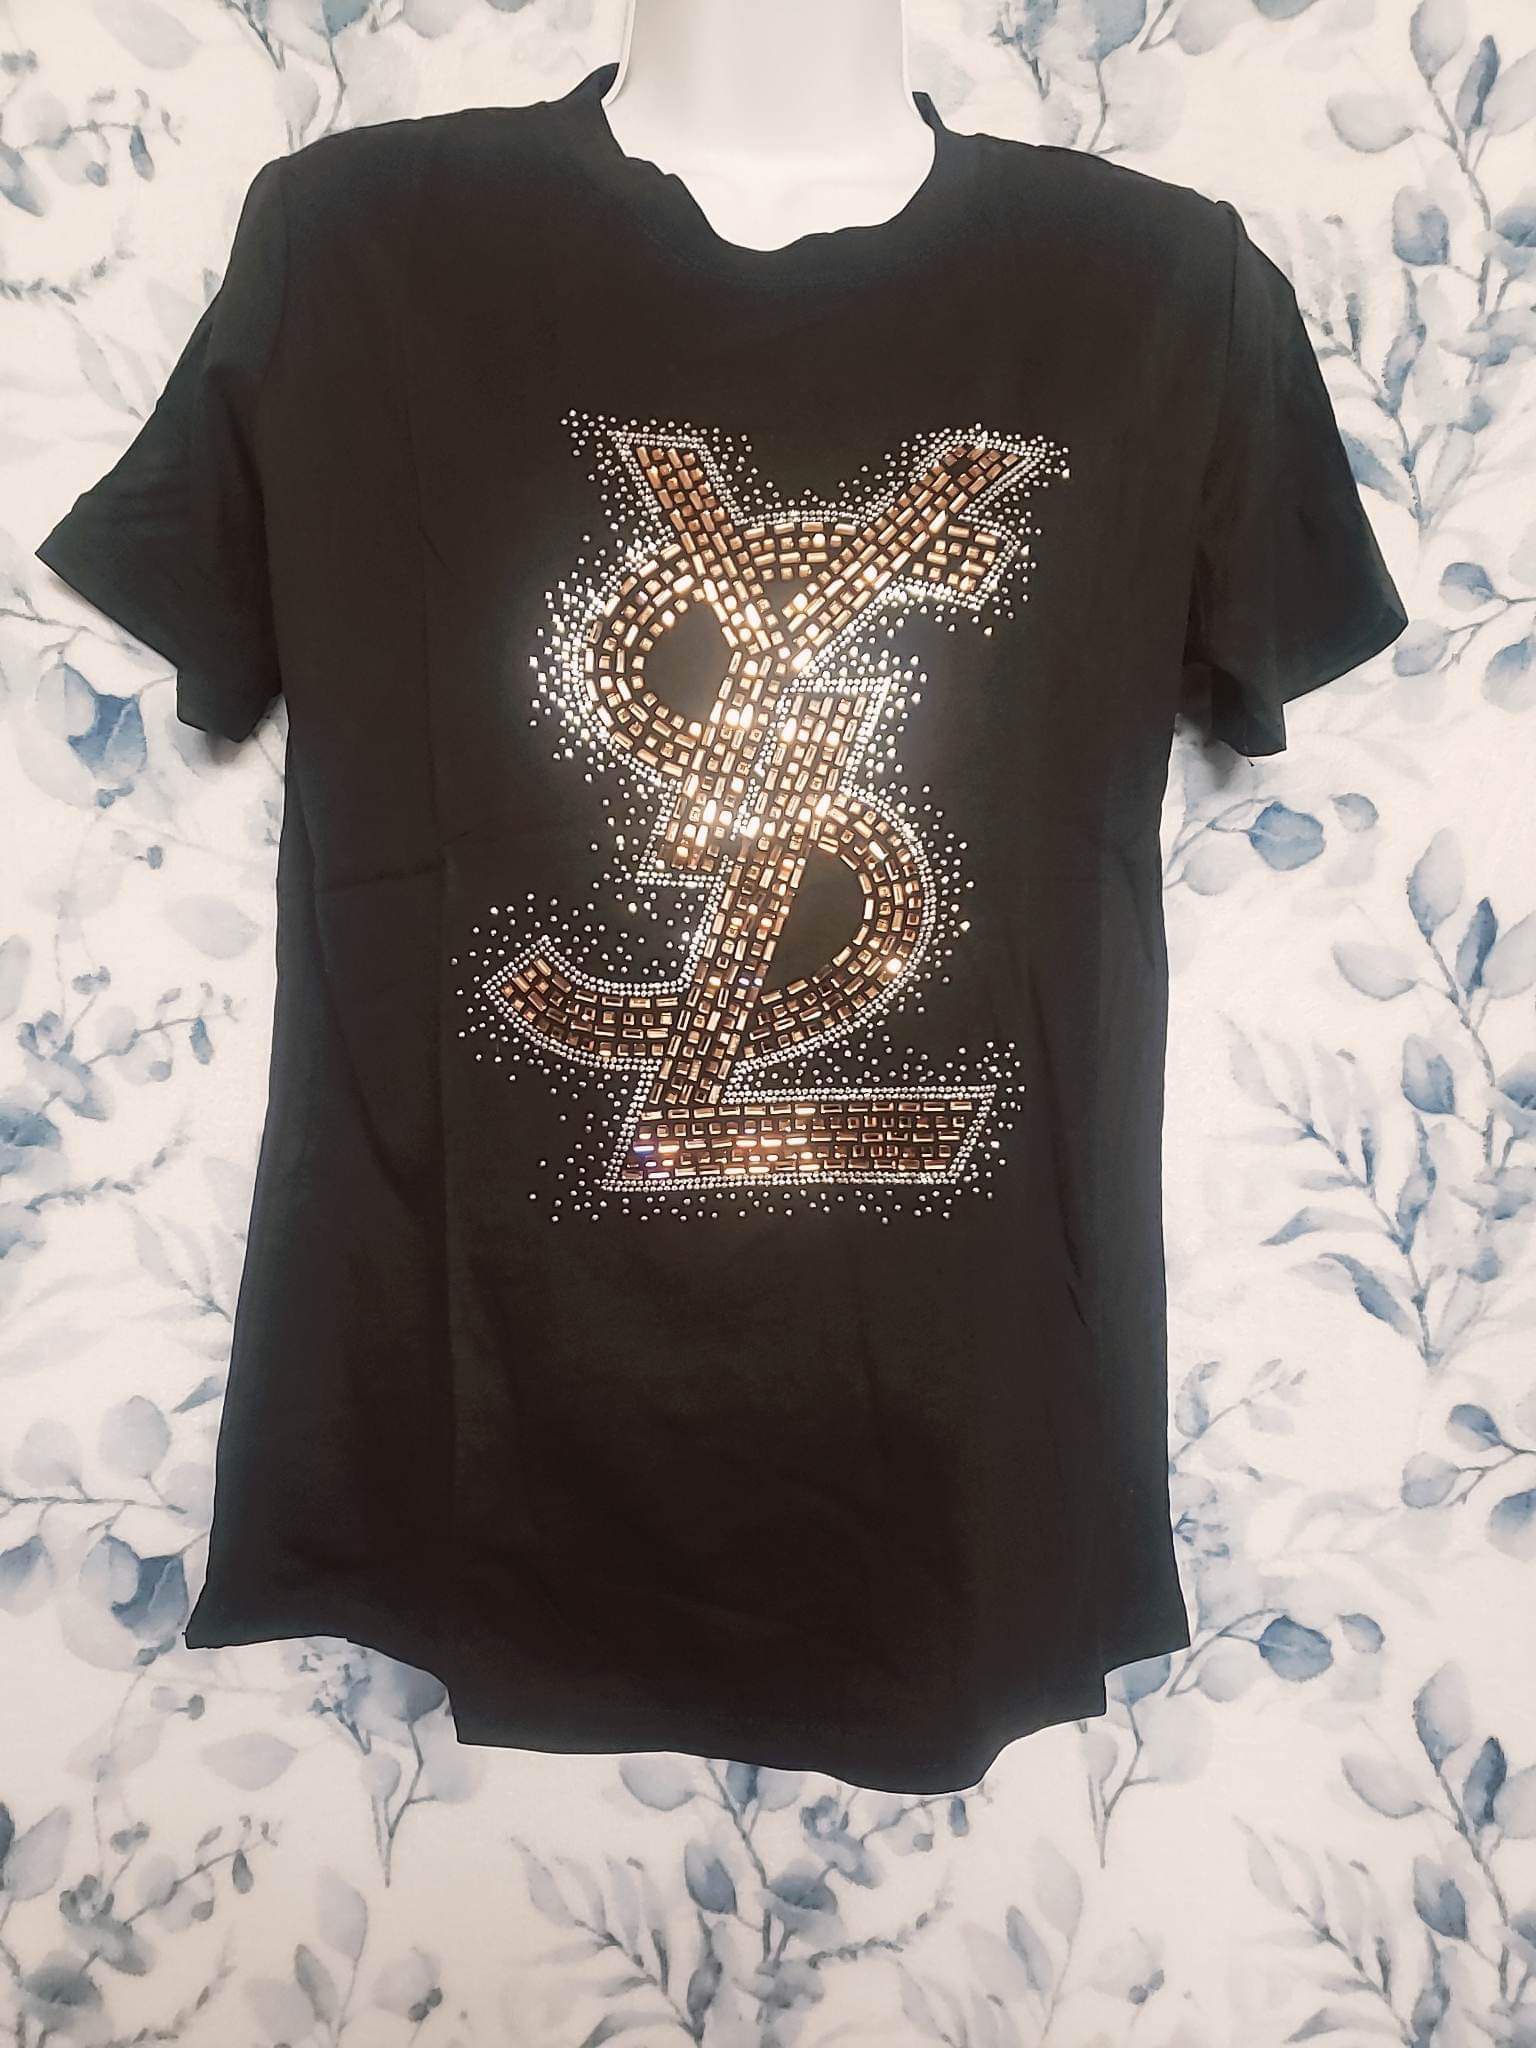 Chanel, Louis Vuitton, YSL Shirt for Sale in Stockton, CA - OfferUp